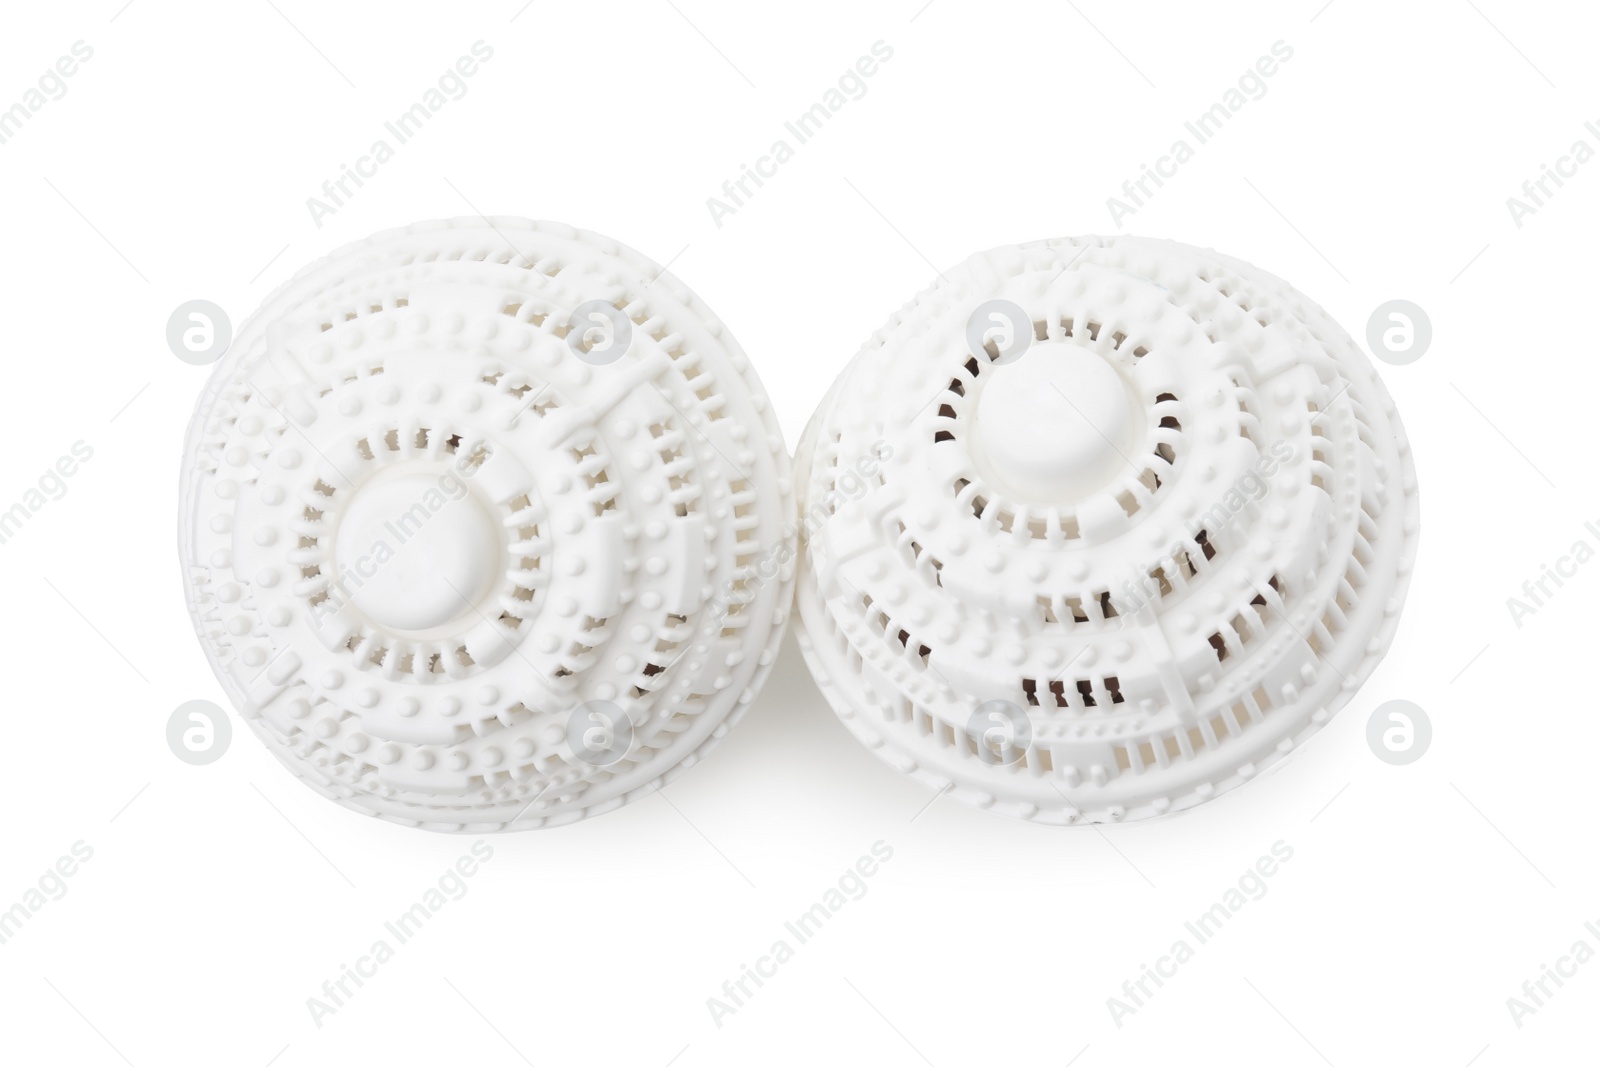 Photo of Dryer balls for washing machine on white background, top view. Laundry detergent substitute